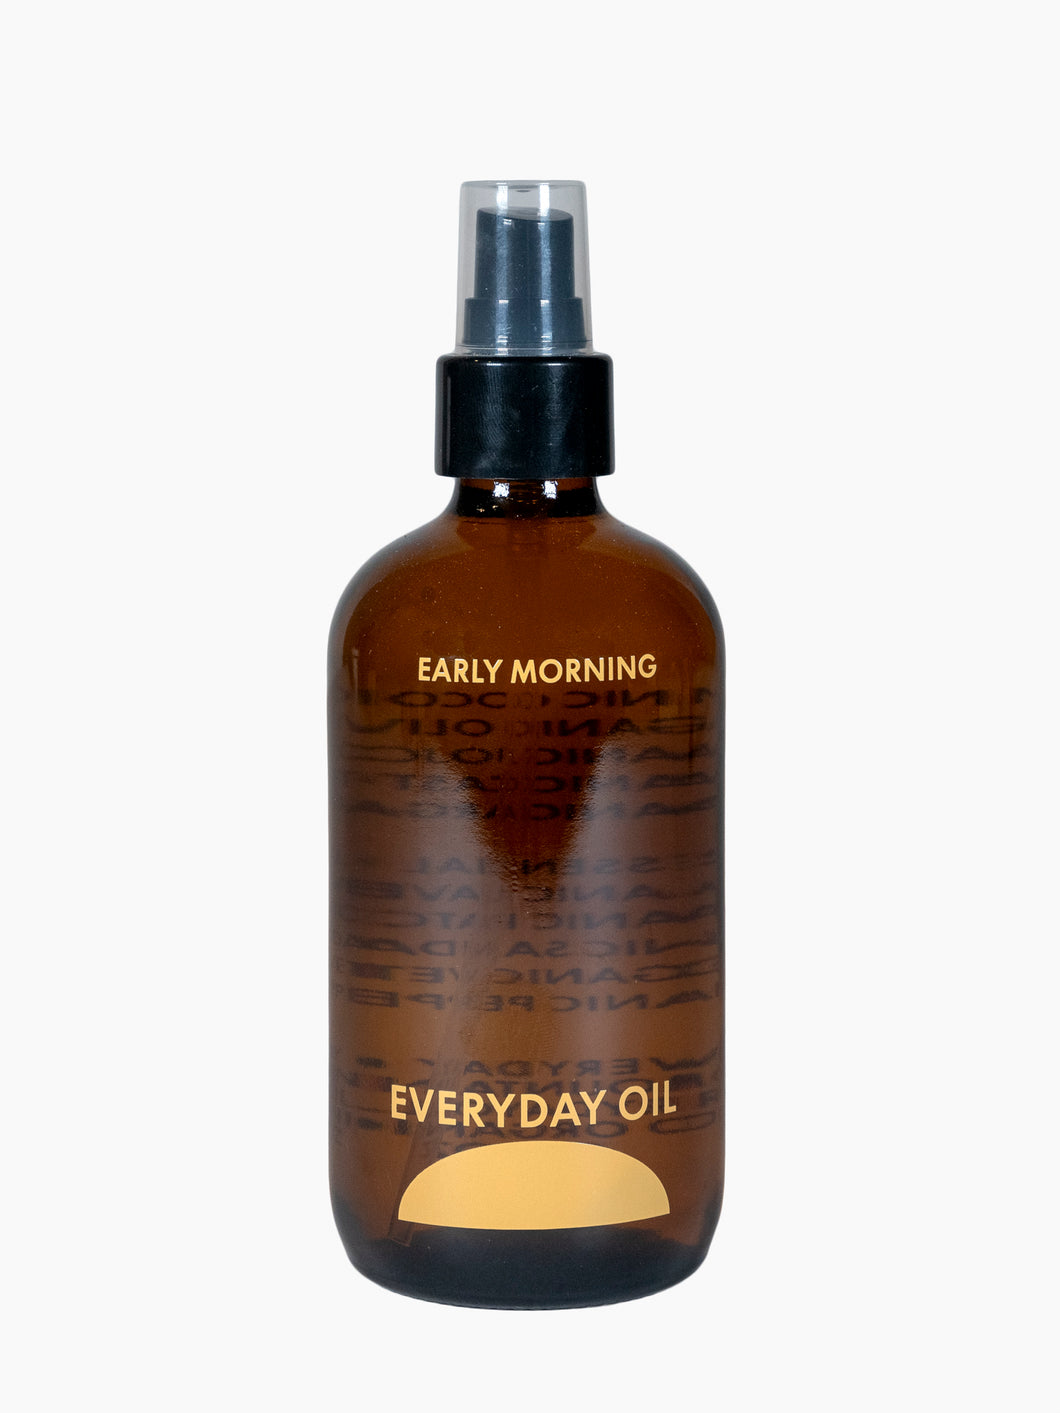 Everyday Oil Early Morning Blend 8oz